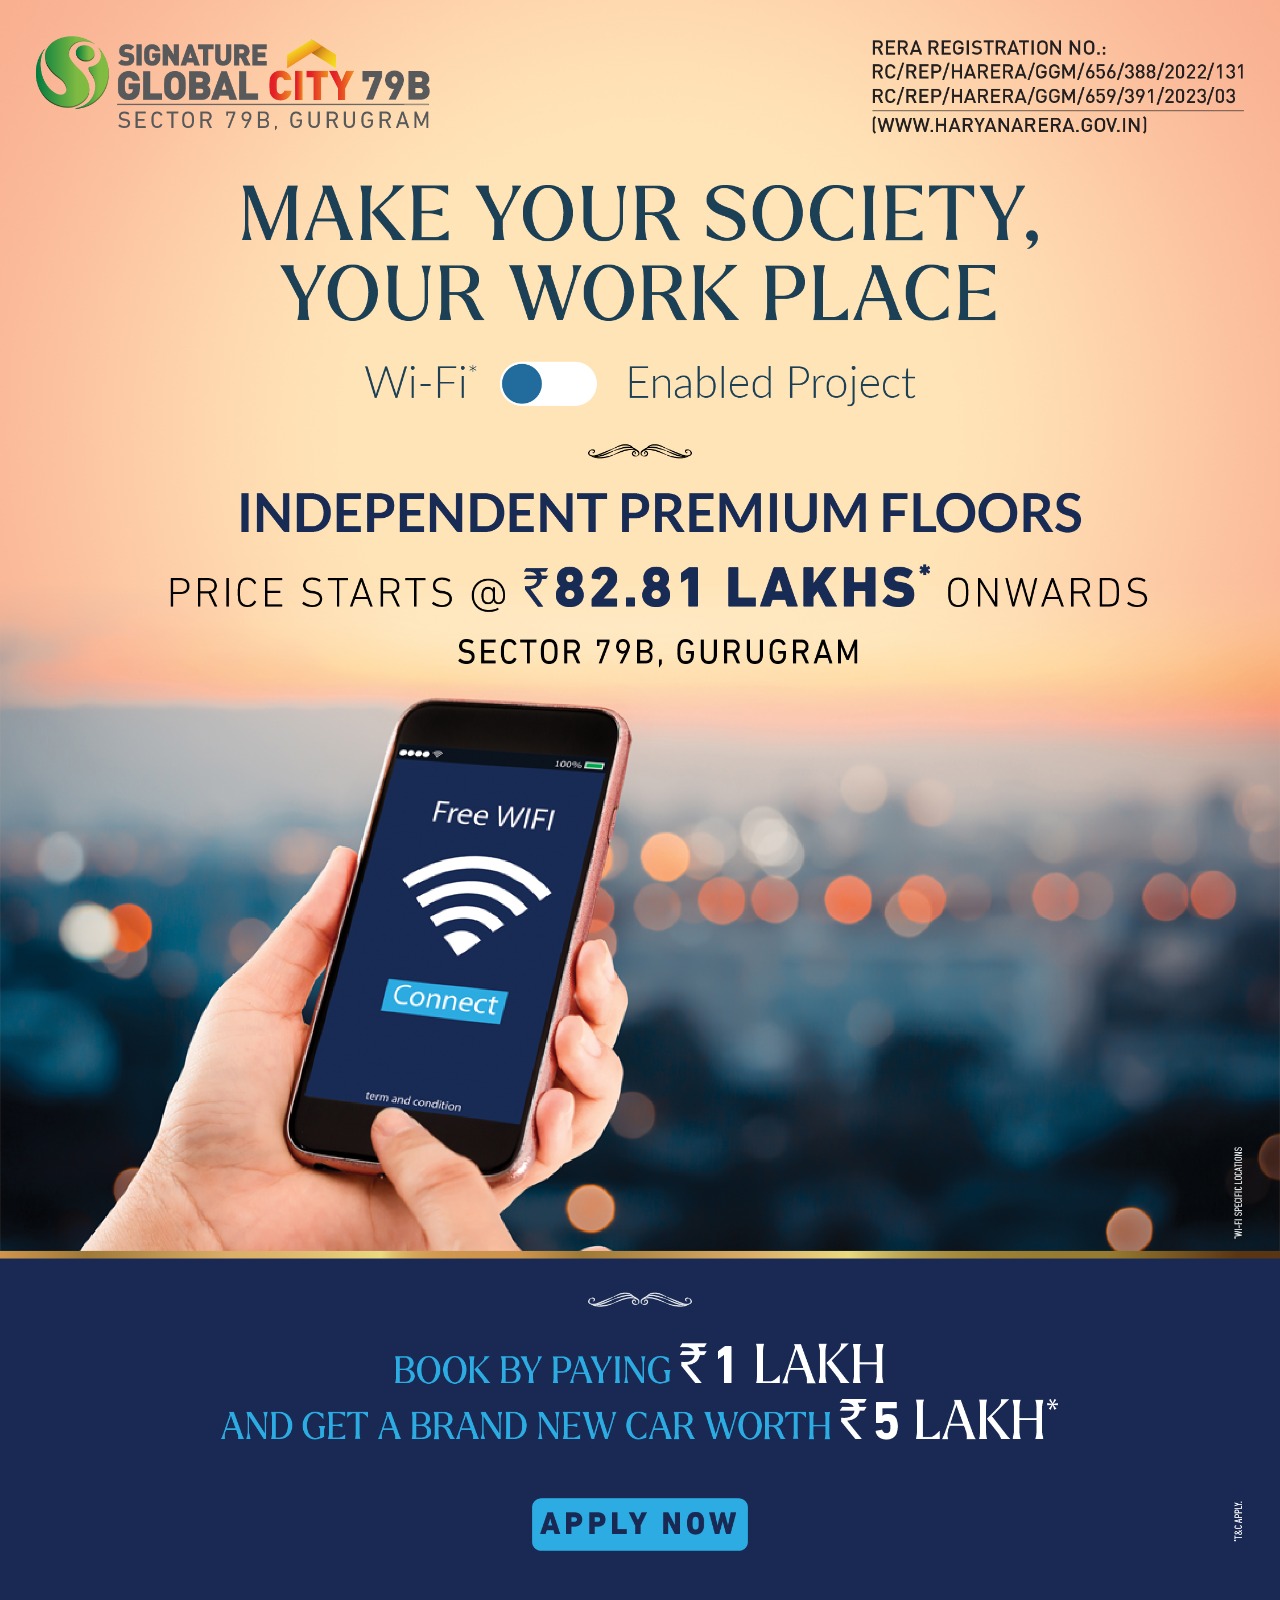 Enjoy salient features like Wi-Fi enabled areas at Signature Global City 79B, Sector 79B, Gurgaon